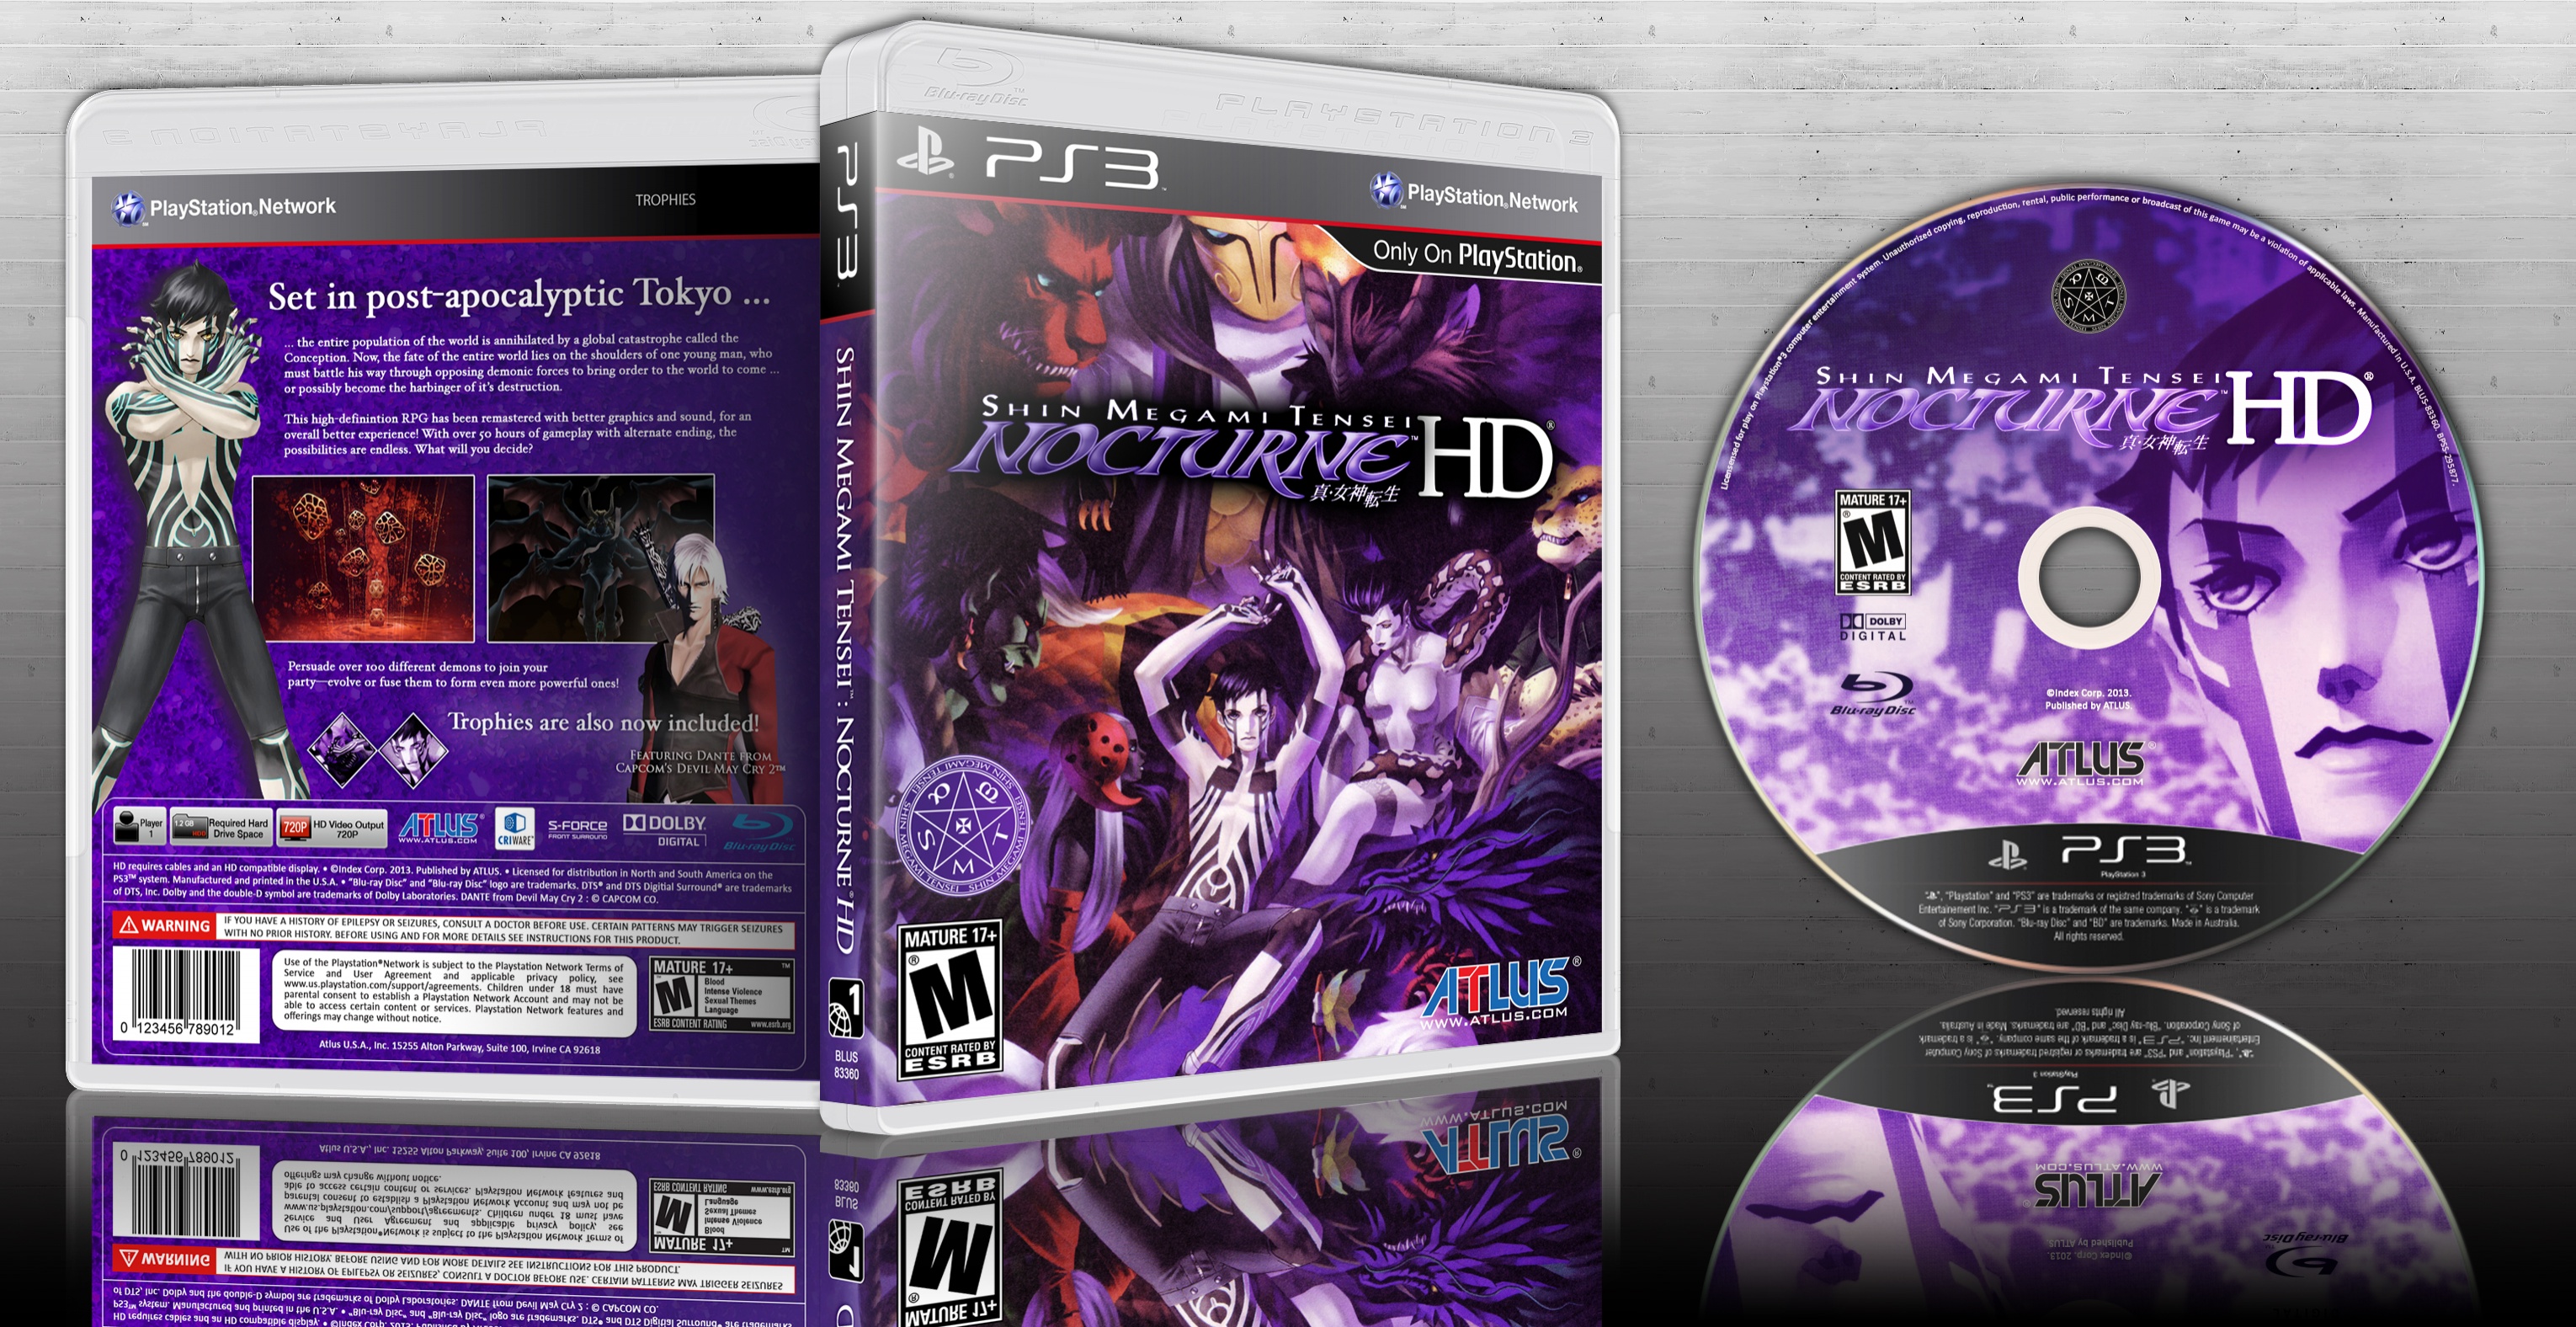 Shin Megami Tensei Nocturne PlayStation 3 Box Art Cover by lucidhalos